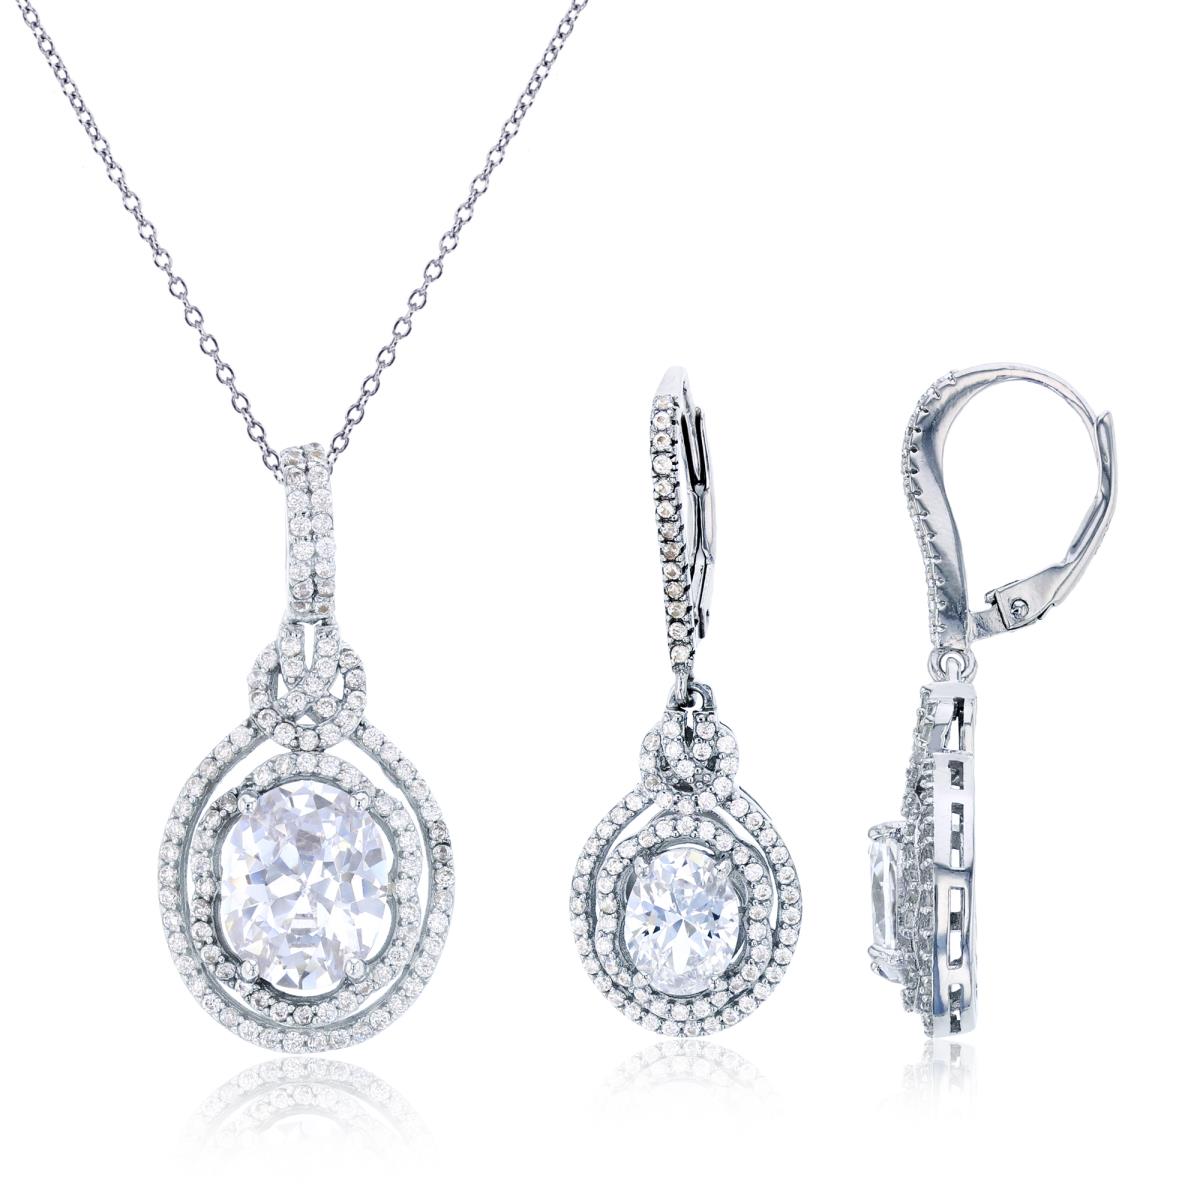 Sterling Silver Rhodium Ov/Rnd White CZ Double Halo Dangling 18"+2" Necklace/Earrings Set